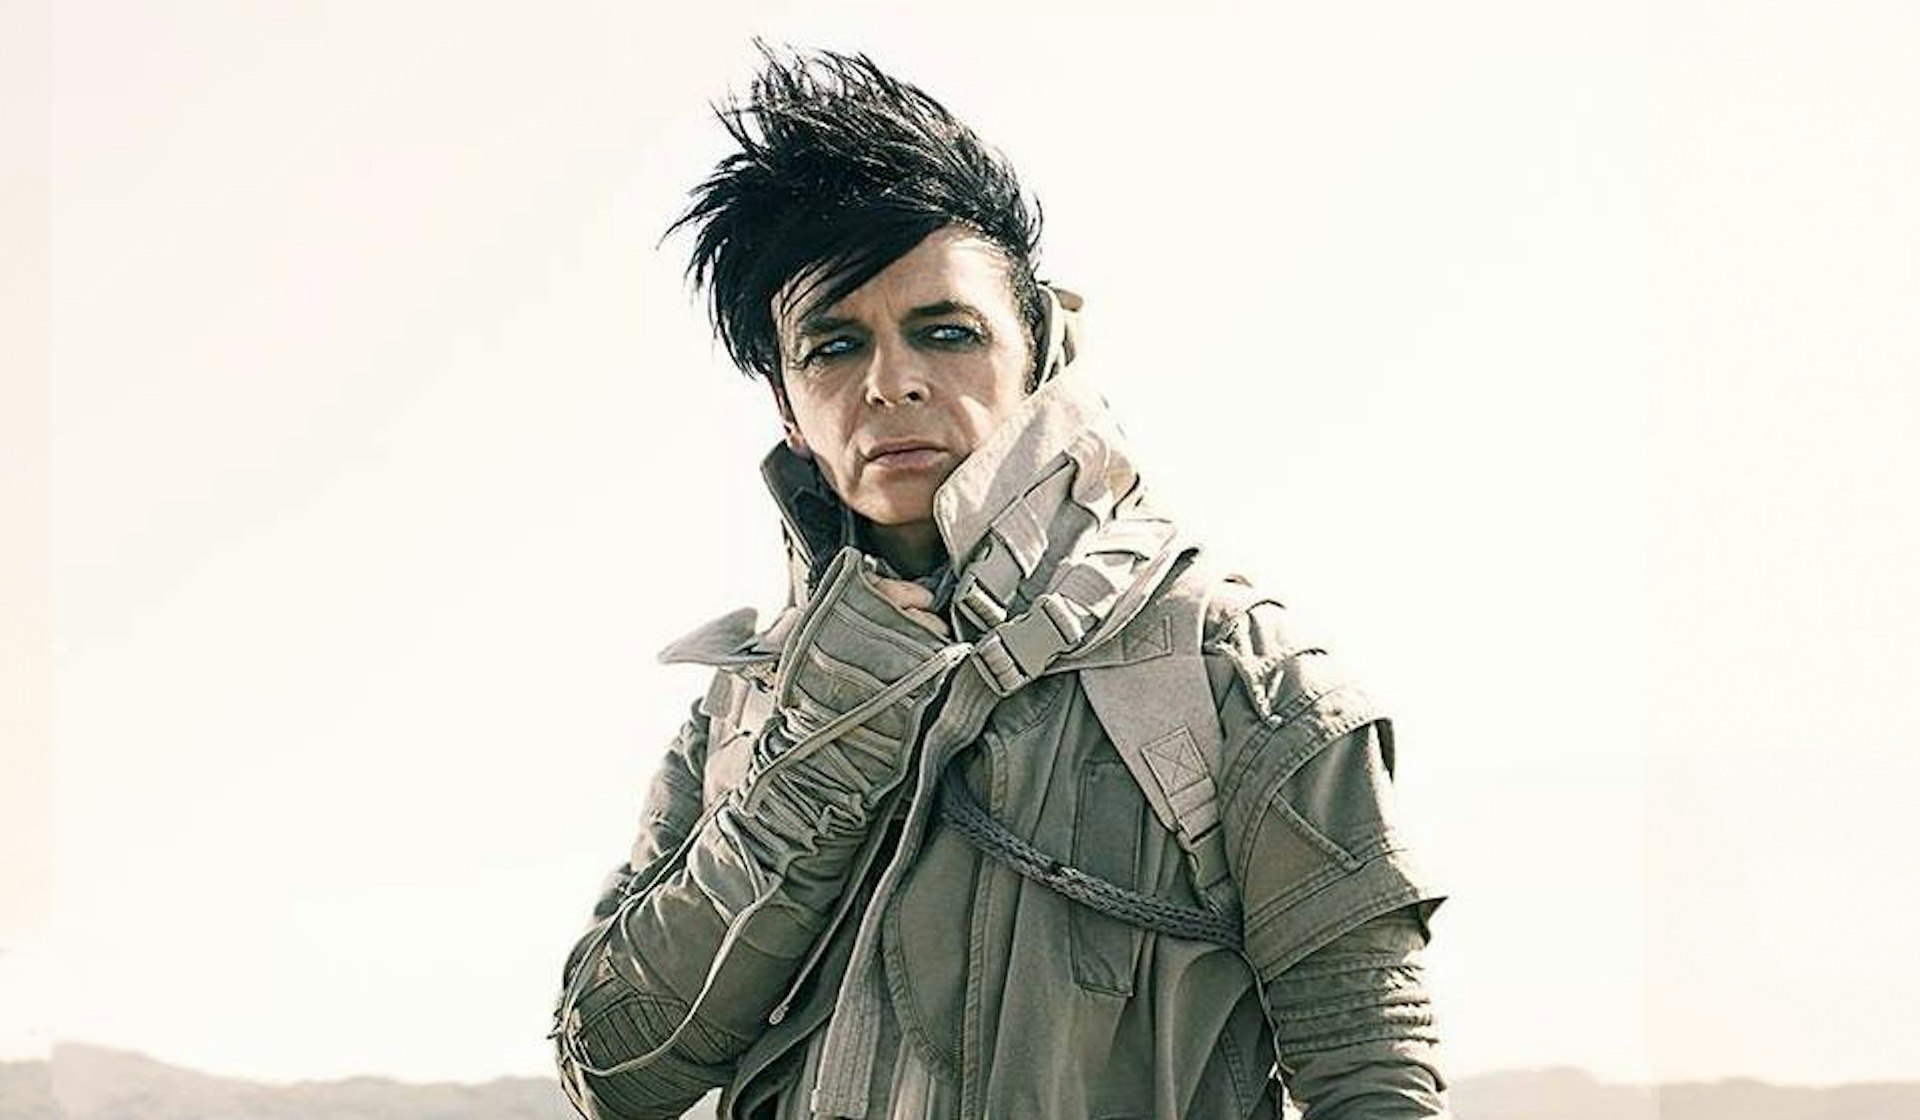 Gary Numan: Life lessons from a synth-pop superstar